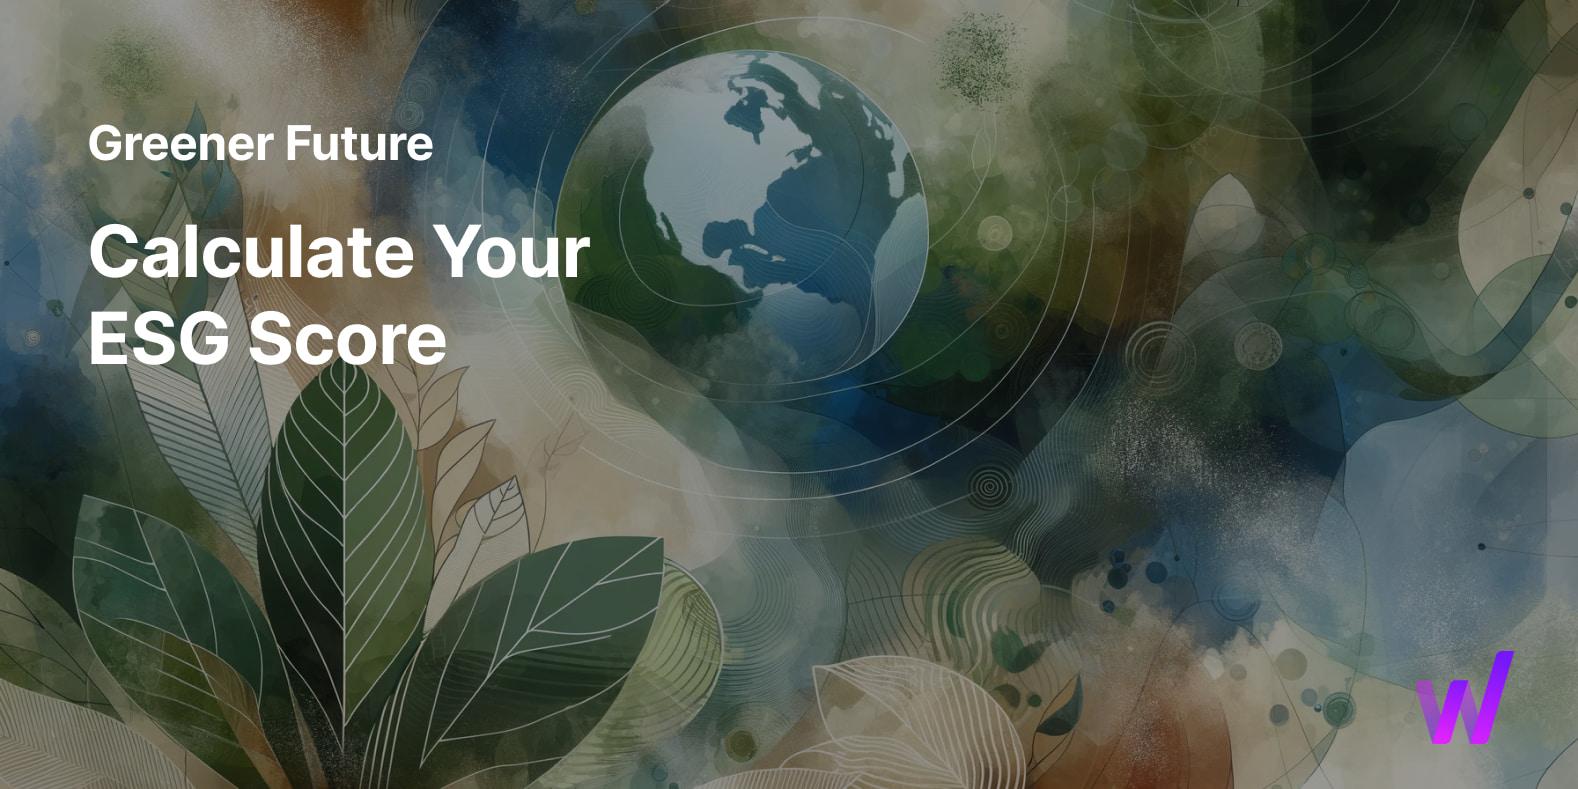 Greener Future - Calculate your ESG score title on the top of the green world image content.